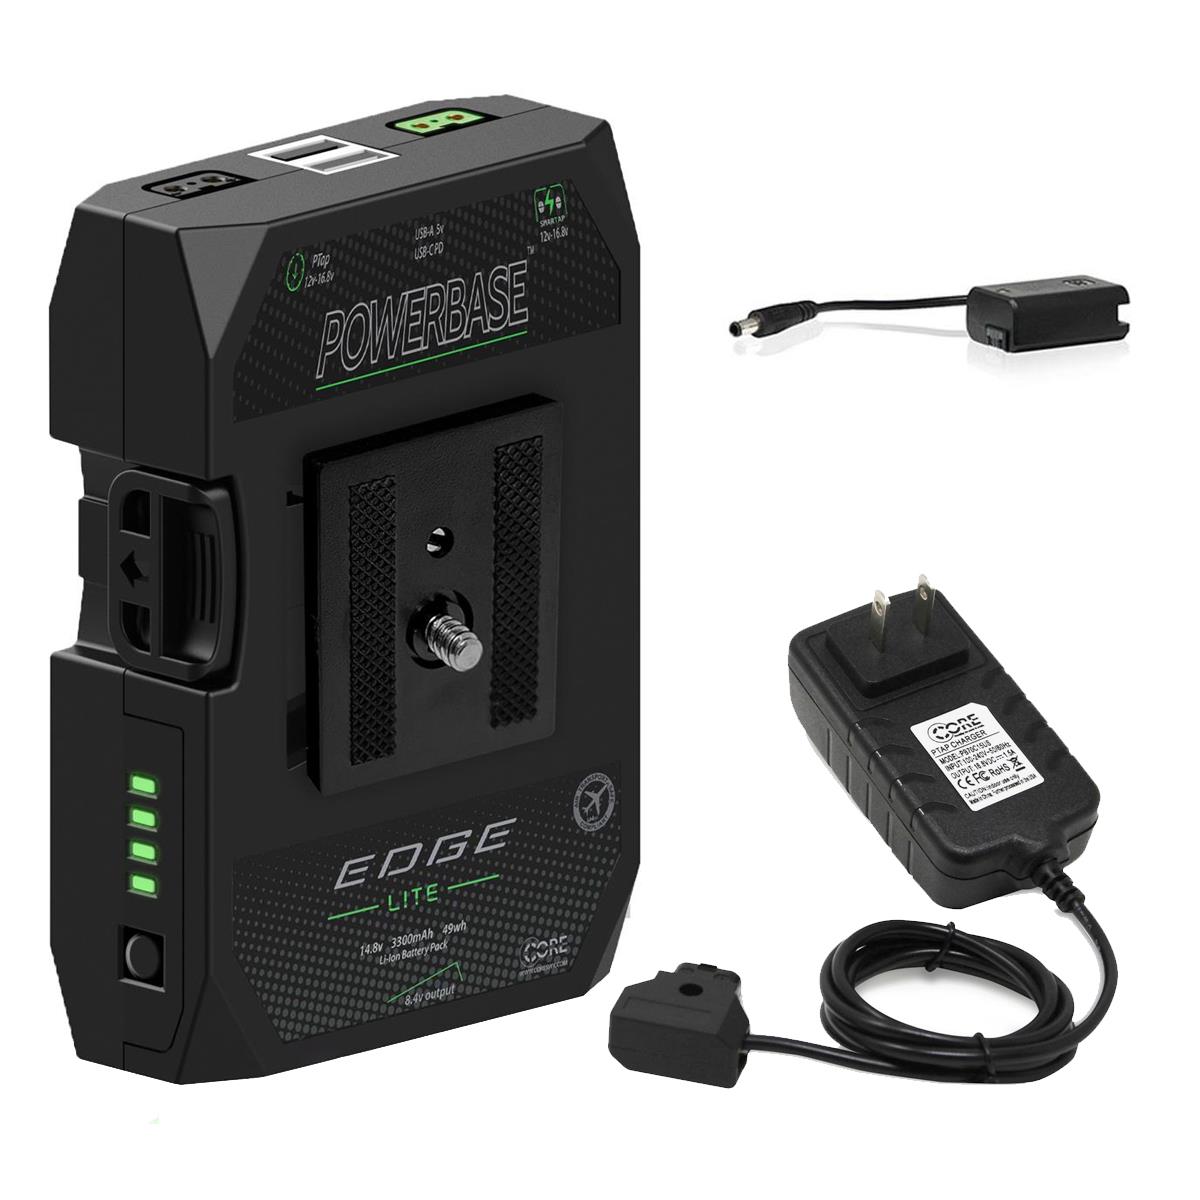 Core SWX PowerBase Edge Lite 49Wh Battery Pack w/Charger, FZ-100 Battery Cable -  PBE-LITE C